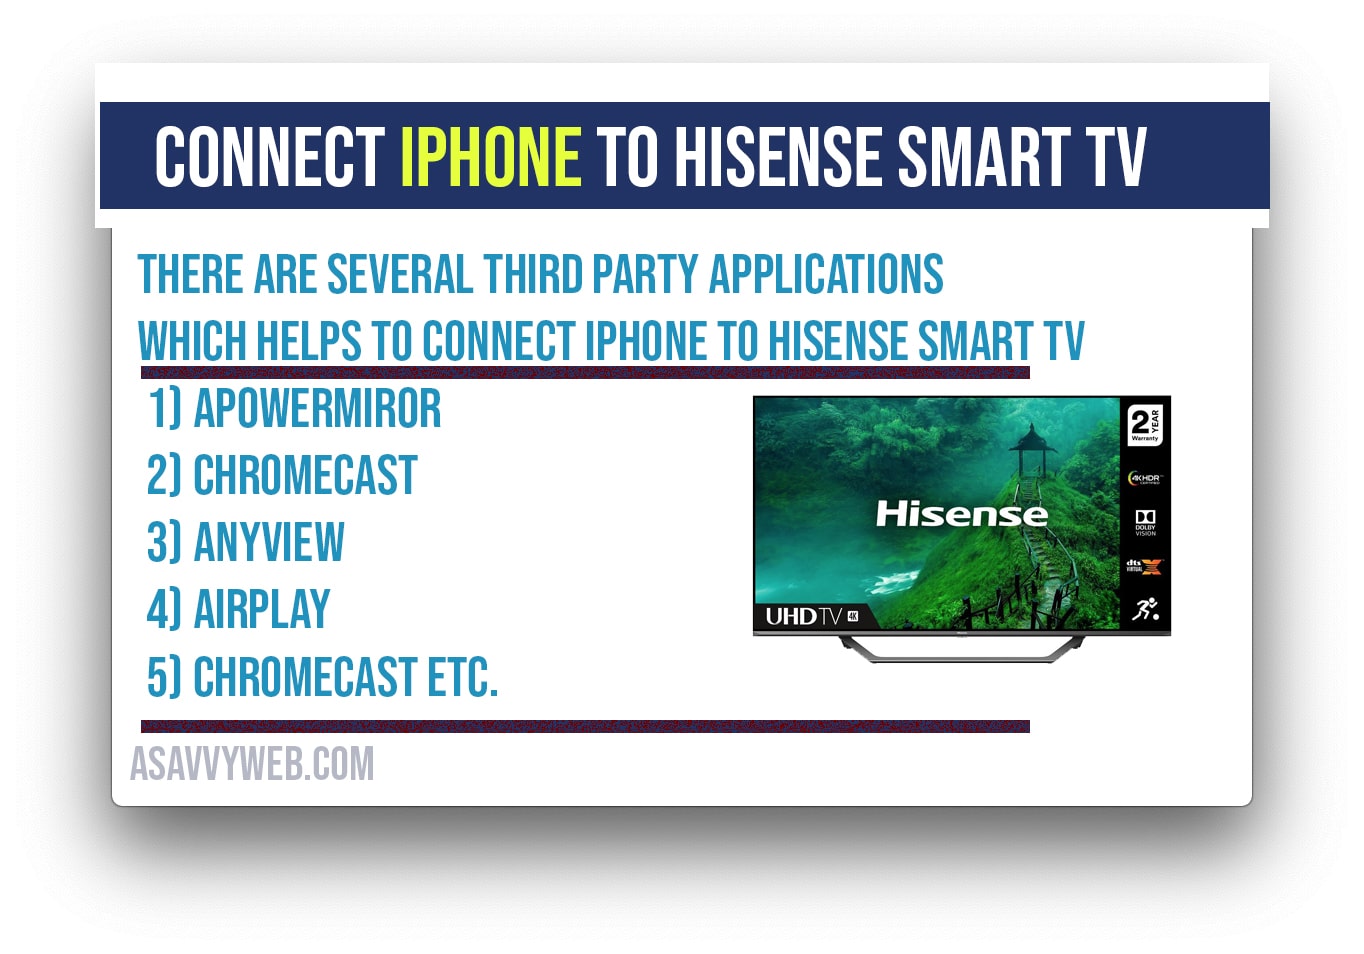 Connect Iphone To Hisense Tv Without, How Do I Mirror My Iphone To Hisense Smart Tv